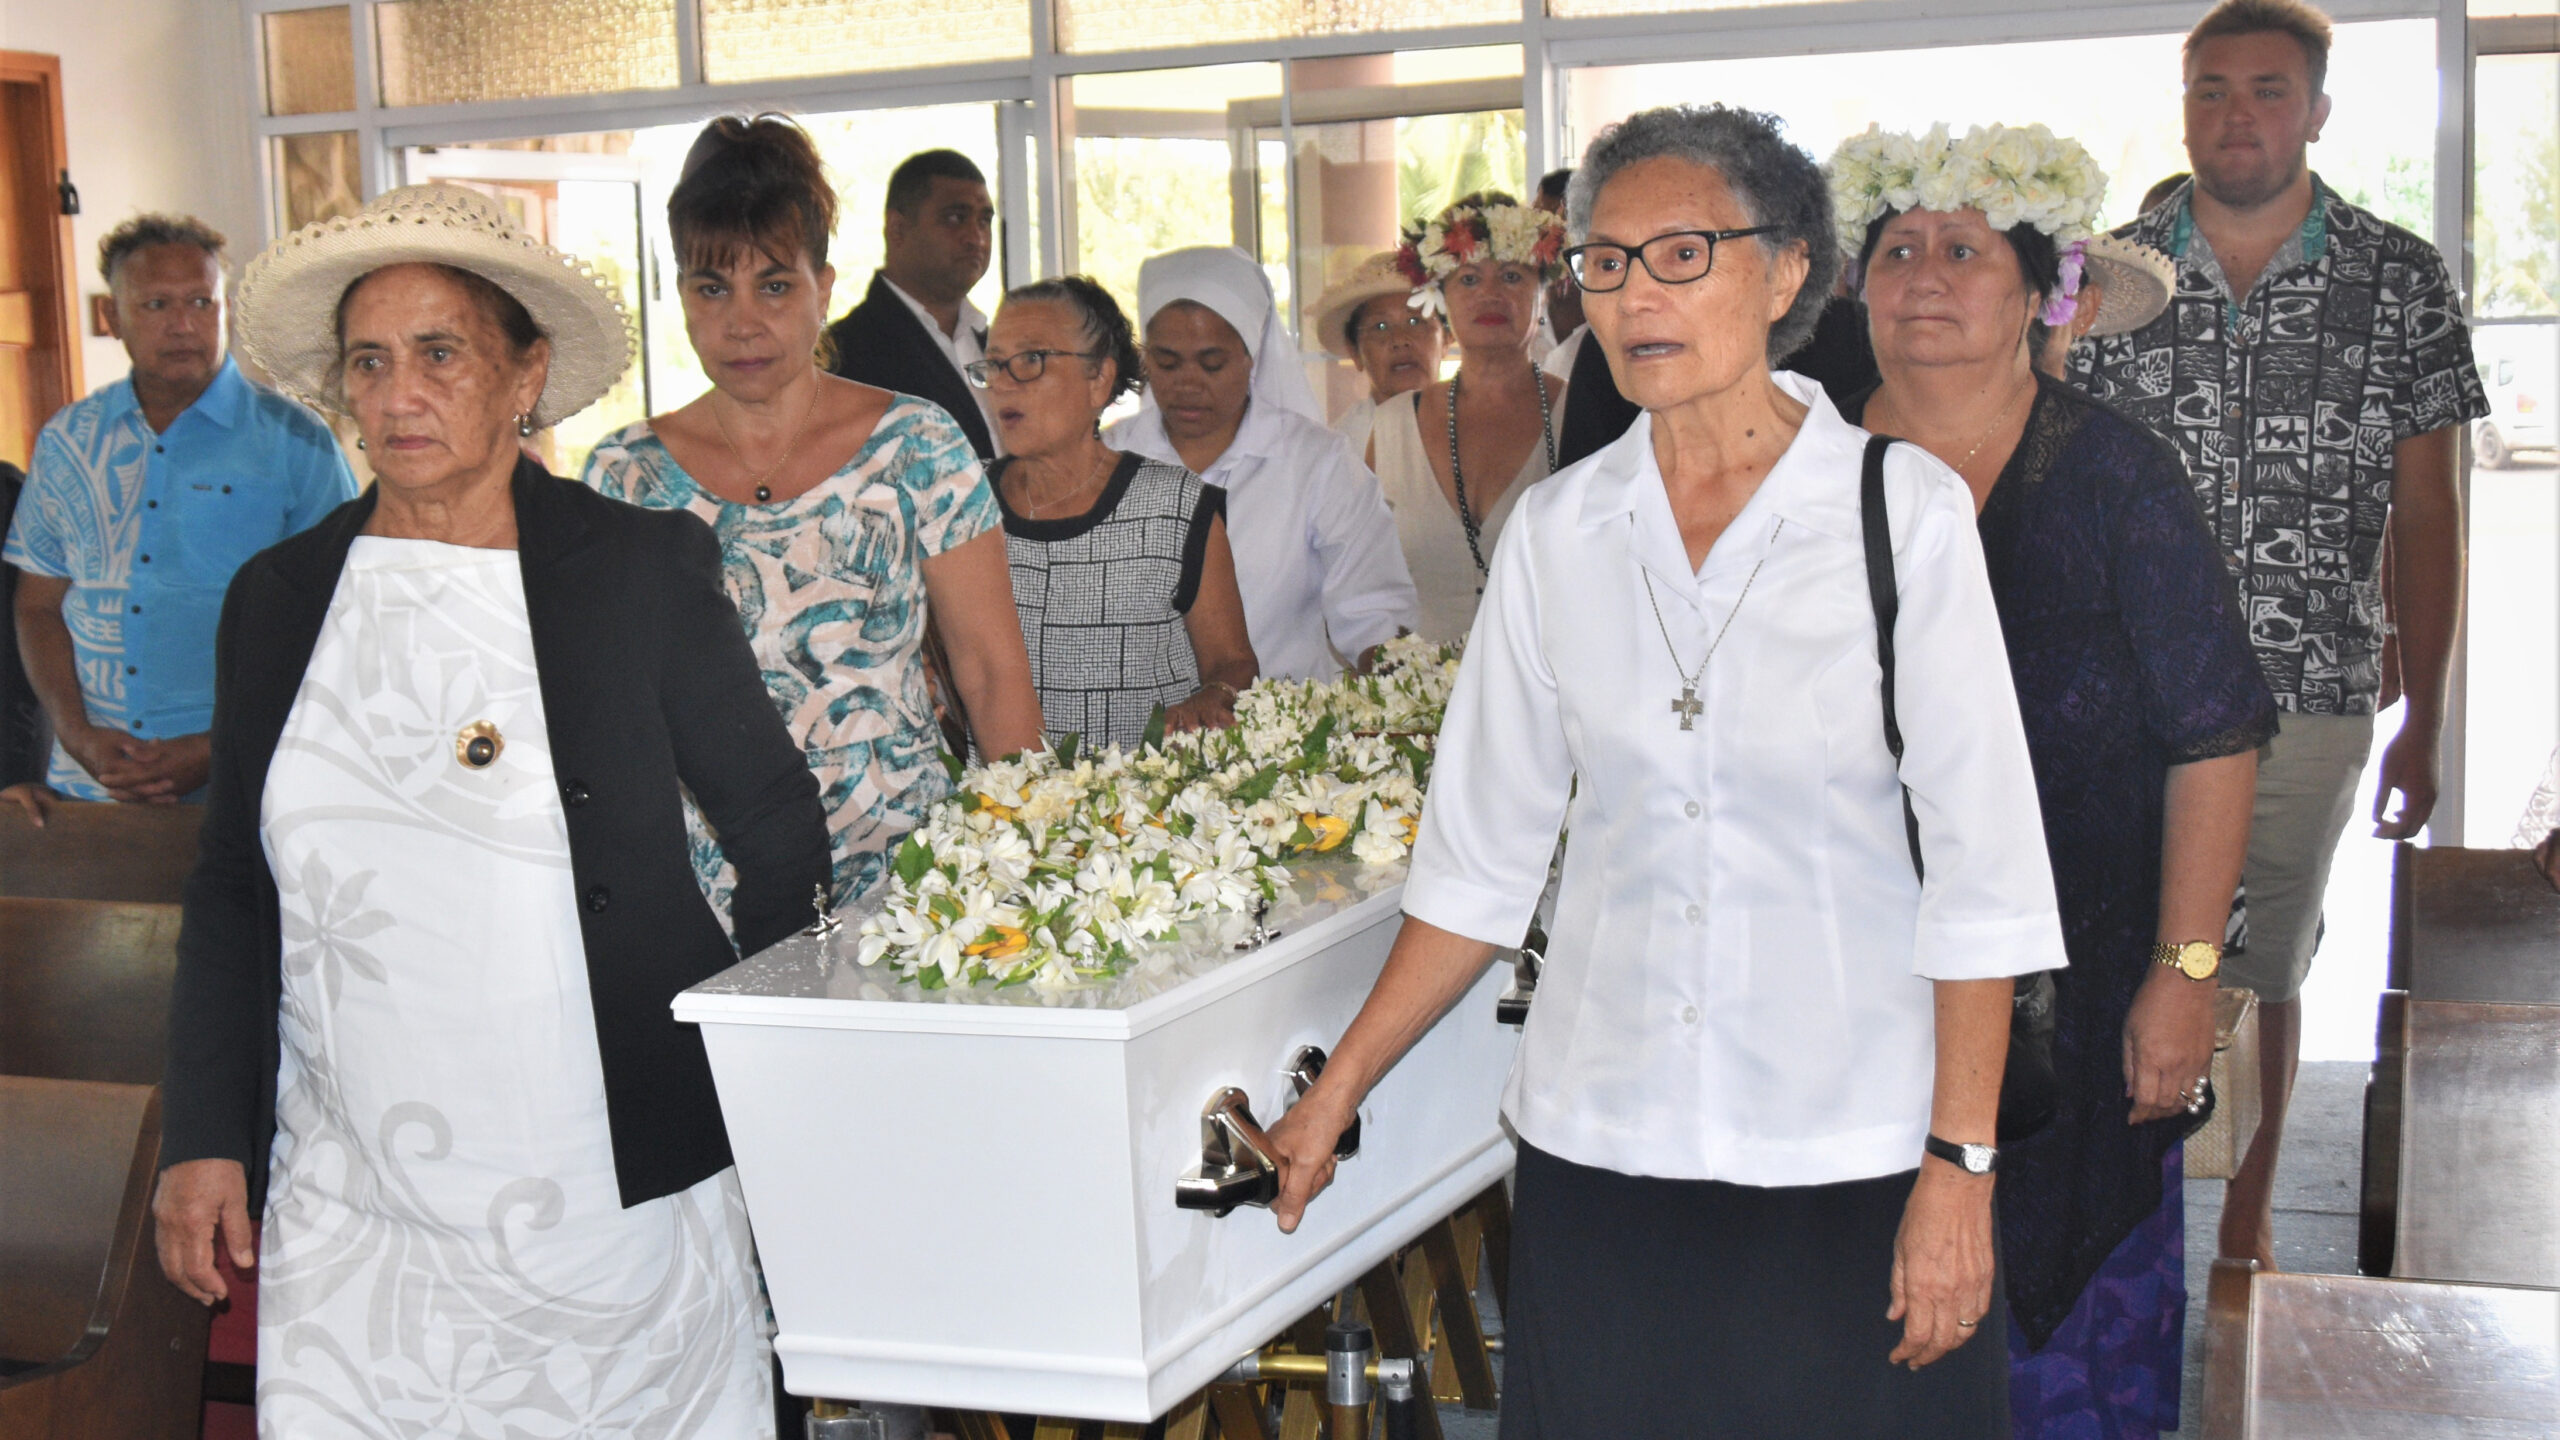 101-year-old Emily Russell laid to rest